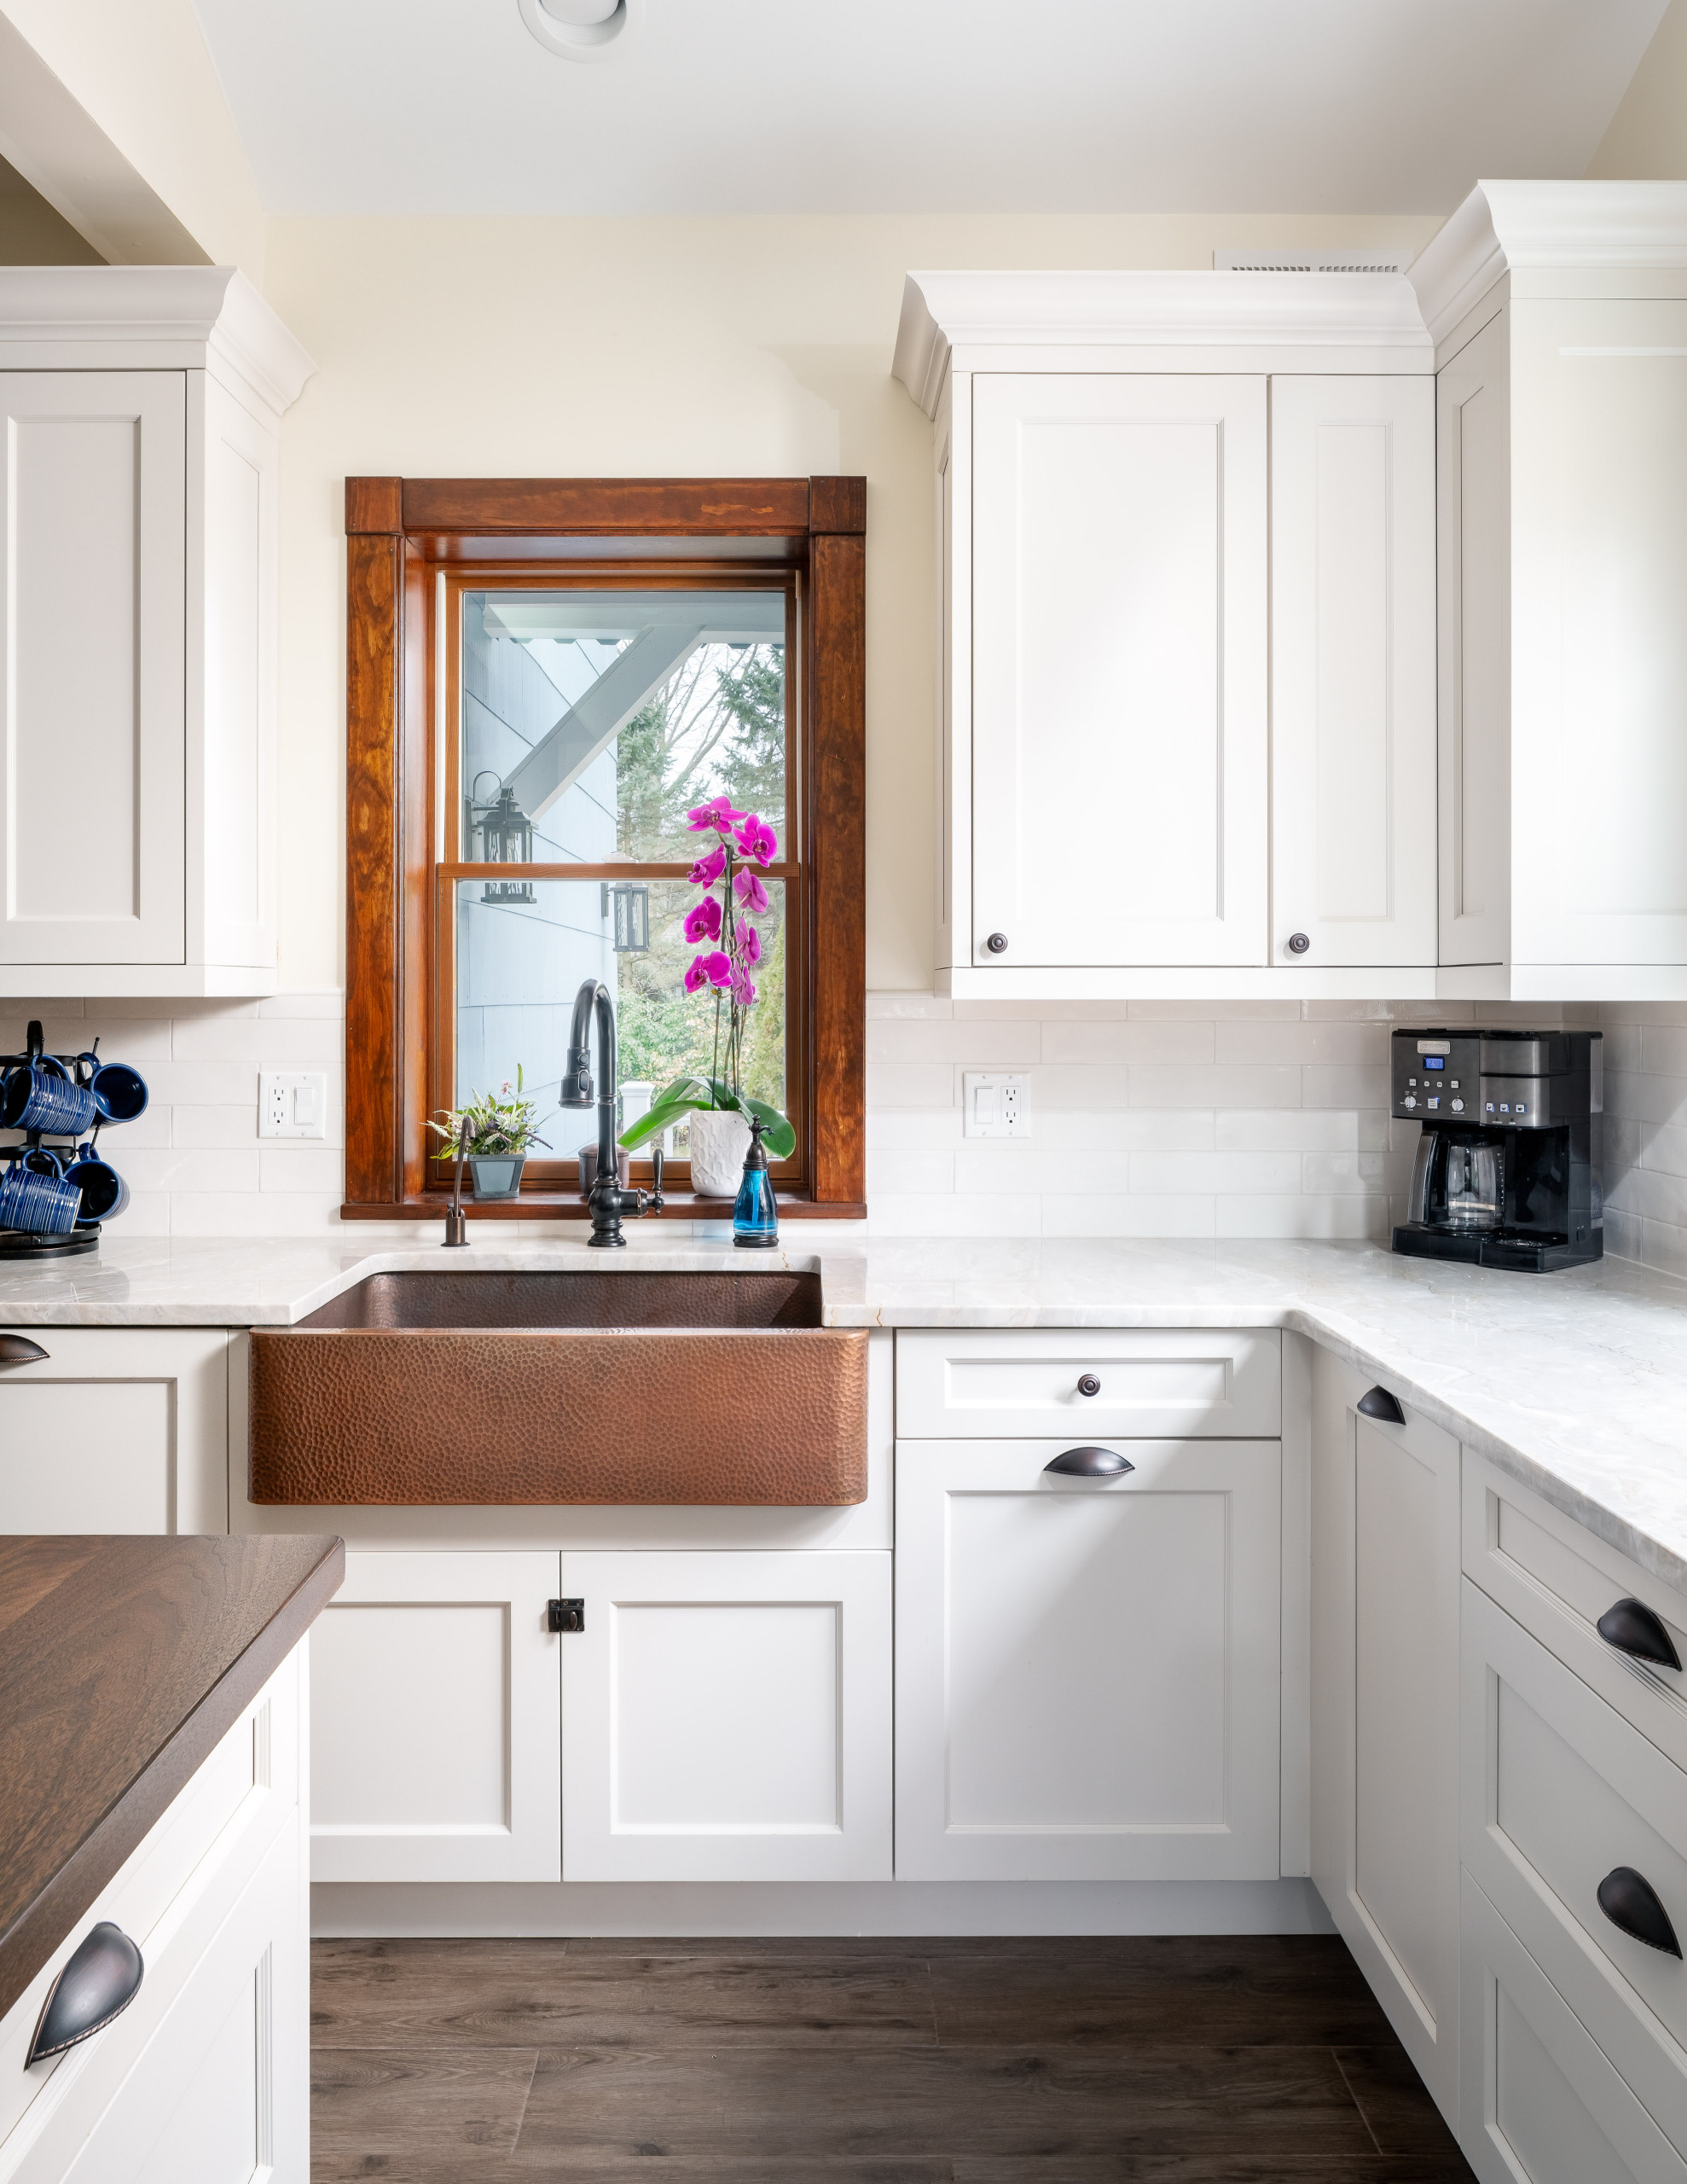 Which Size of Kitchen Sink Should You Choose? | Houzz UK